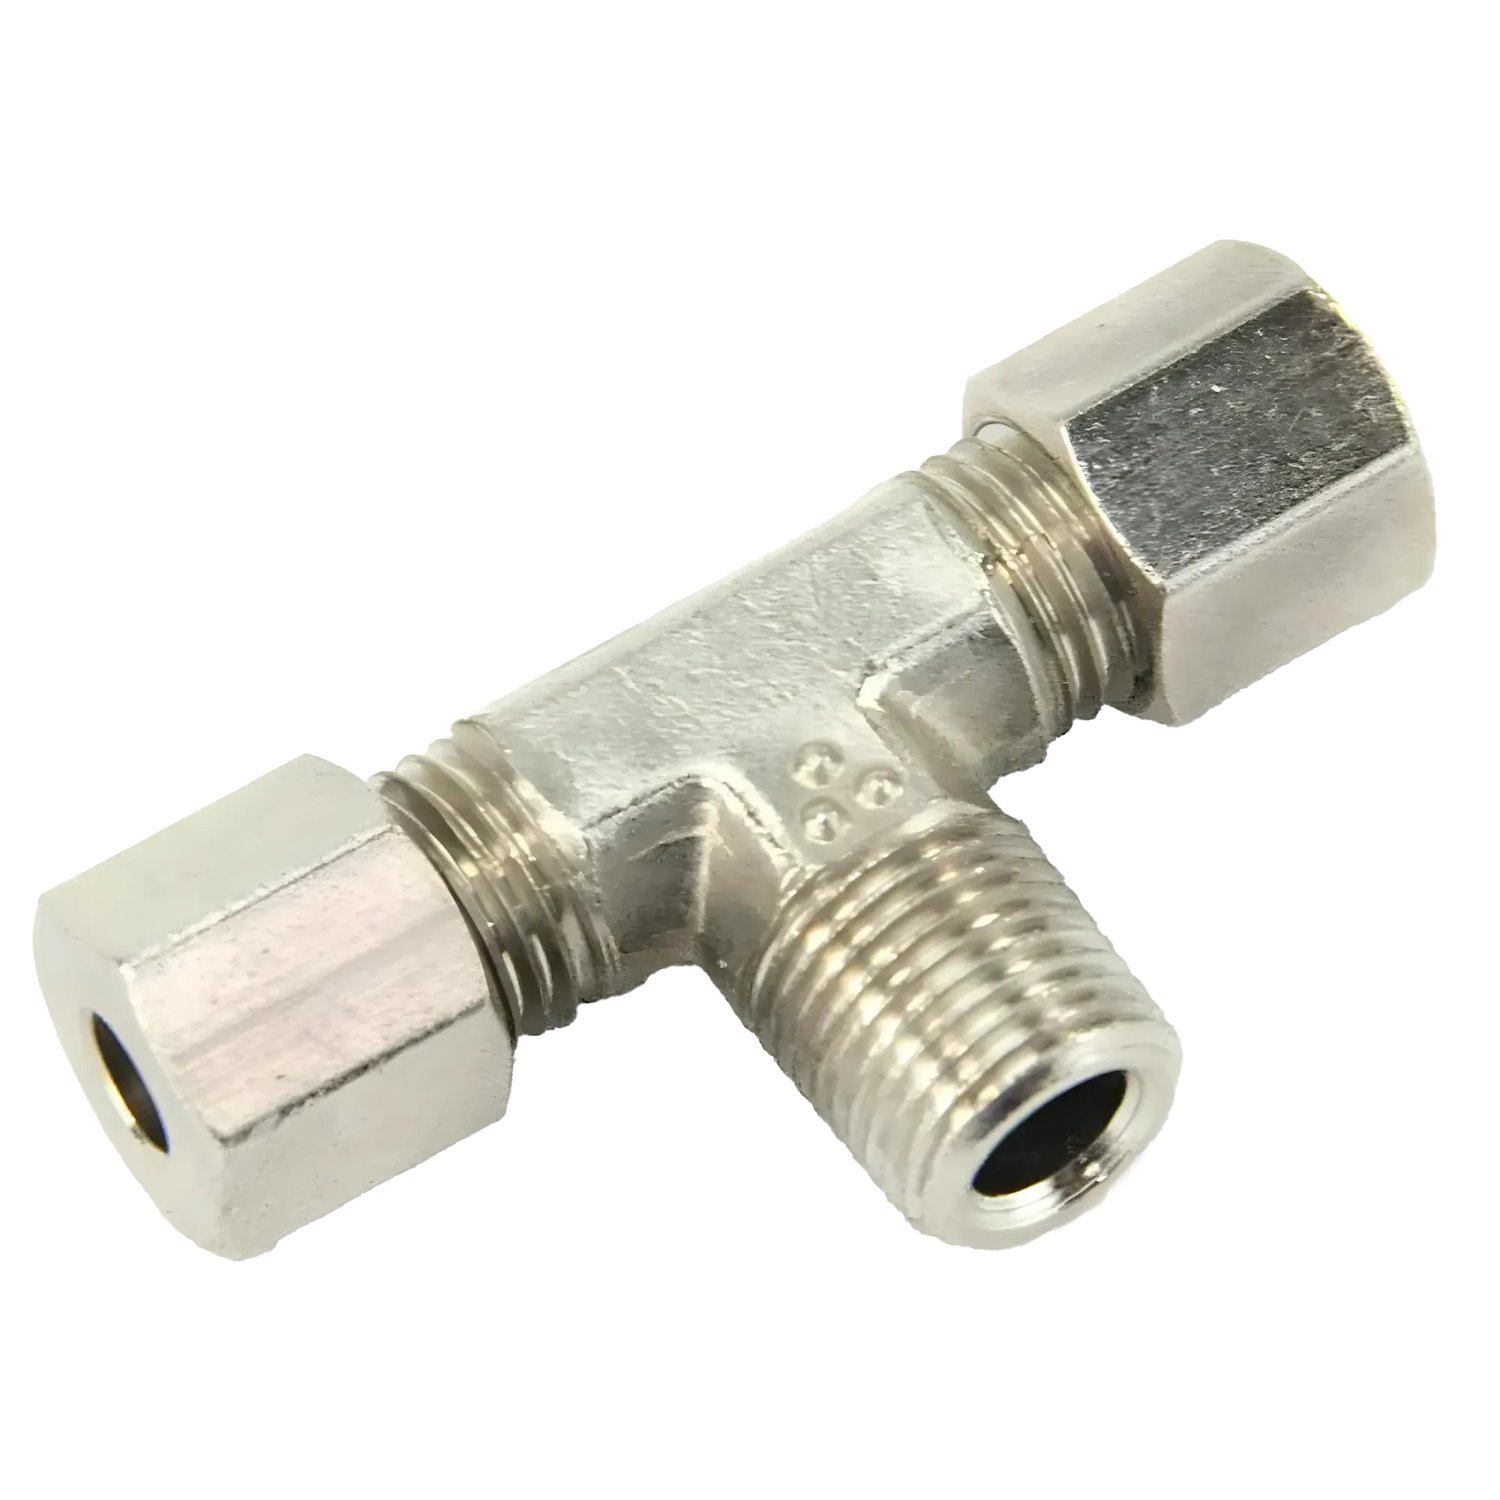 00-01468-B 1/8 in. NPT x 3/16 in. Compression x 3/16 in. Compression Branch Tee Fitting